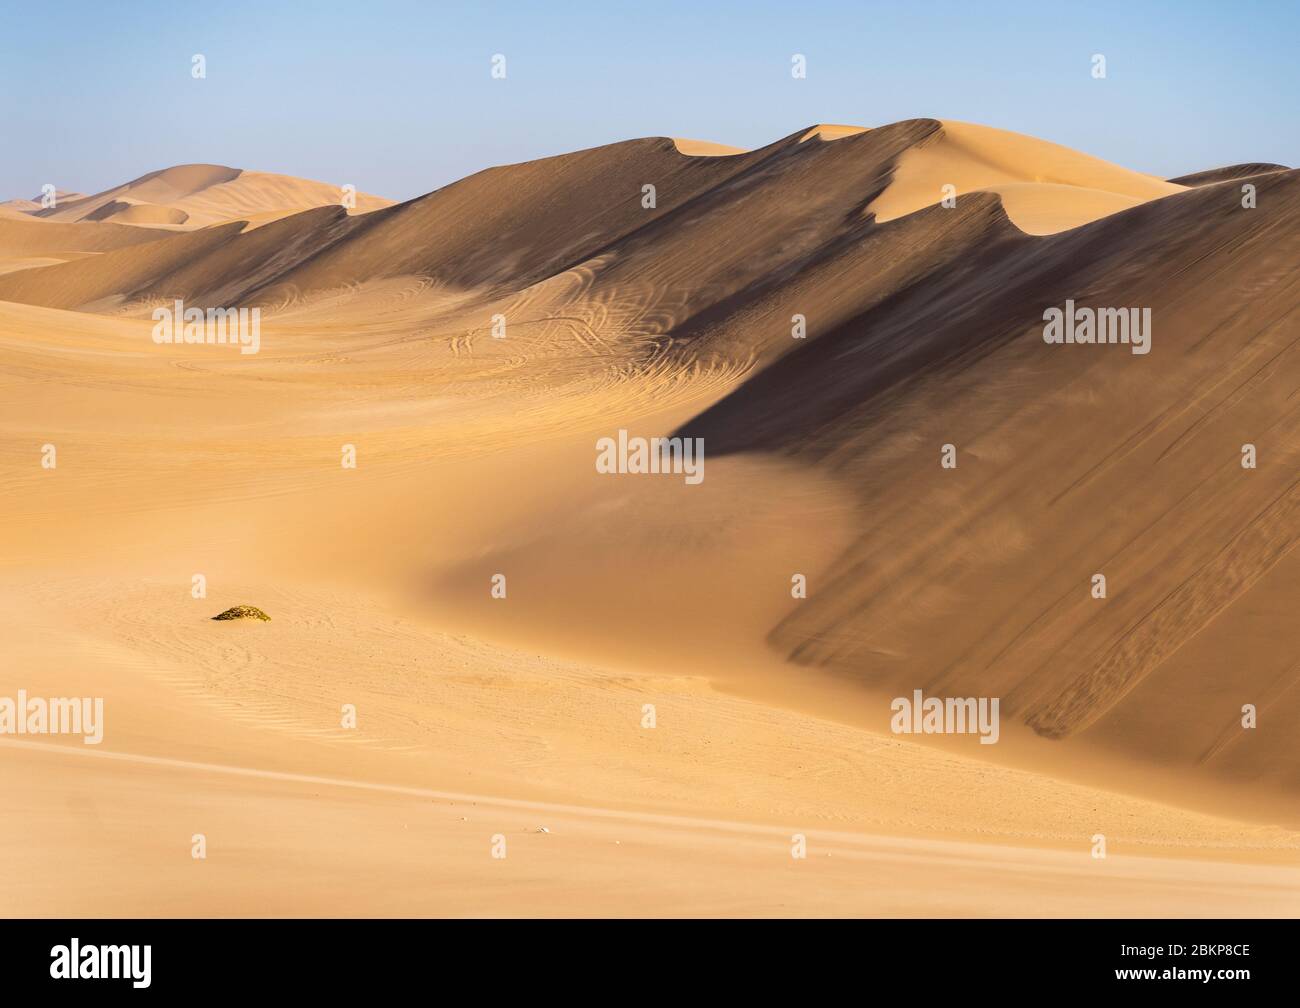 Intricate dune pattern lit by afternoon sun, in the desert near Swakopmund, Namibia Stock Photo